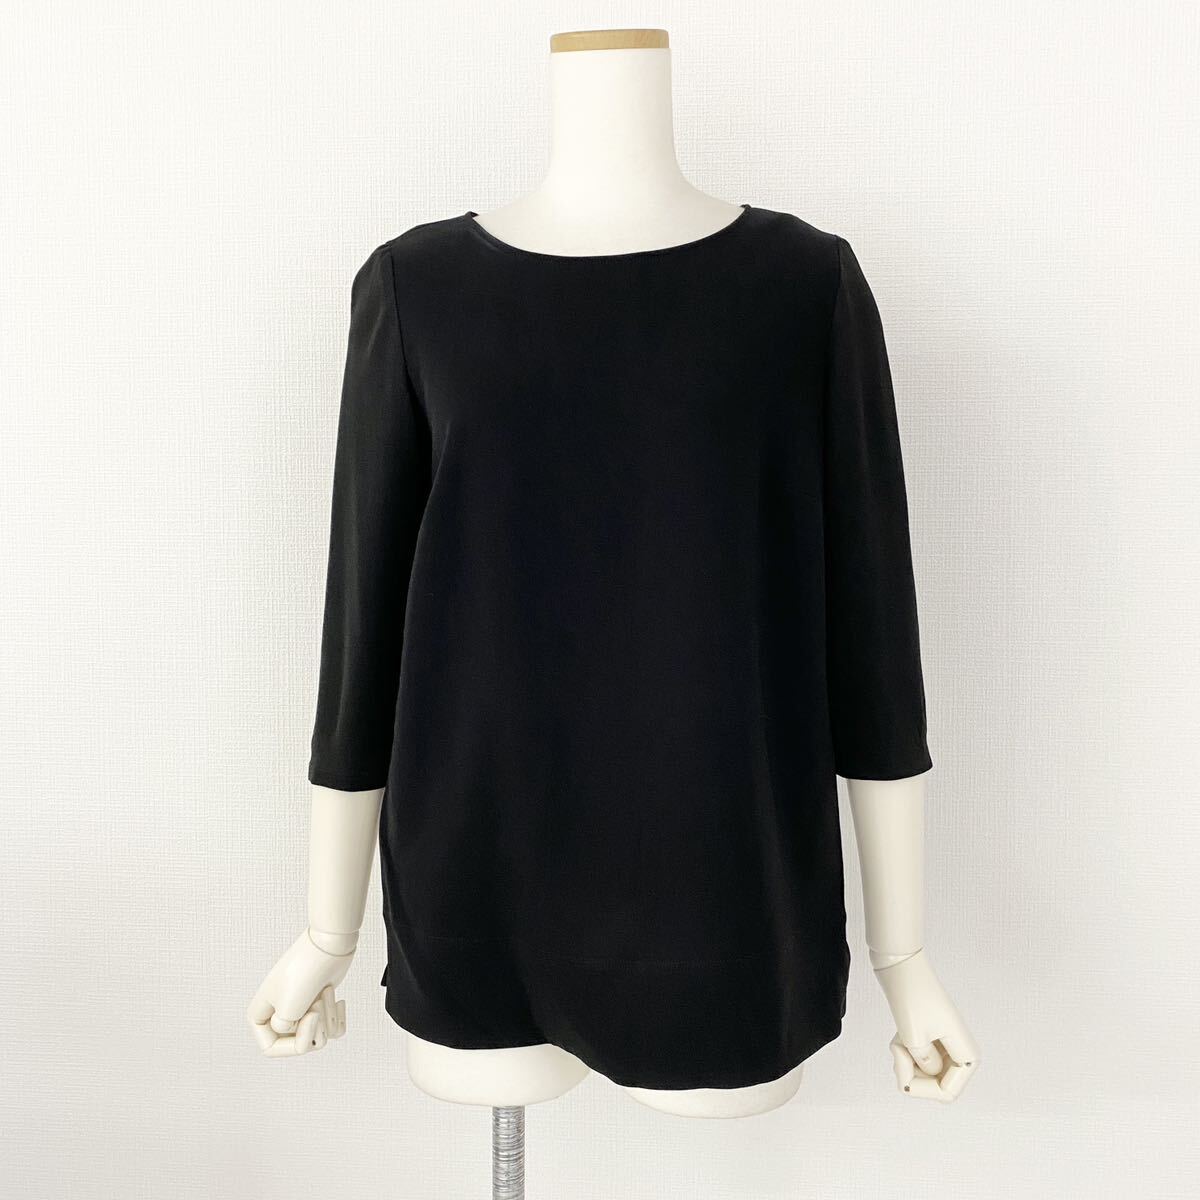 Ec27 Max Mara Max Mara tunic size 36 black lady's sleeve switch 7 minute sleeve cut and sewn pull over side slit tops 